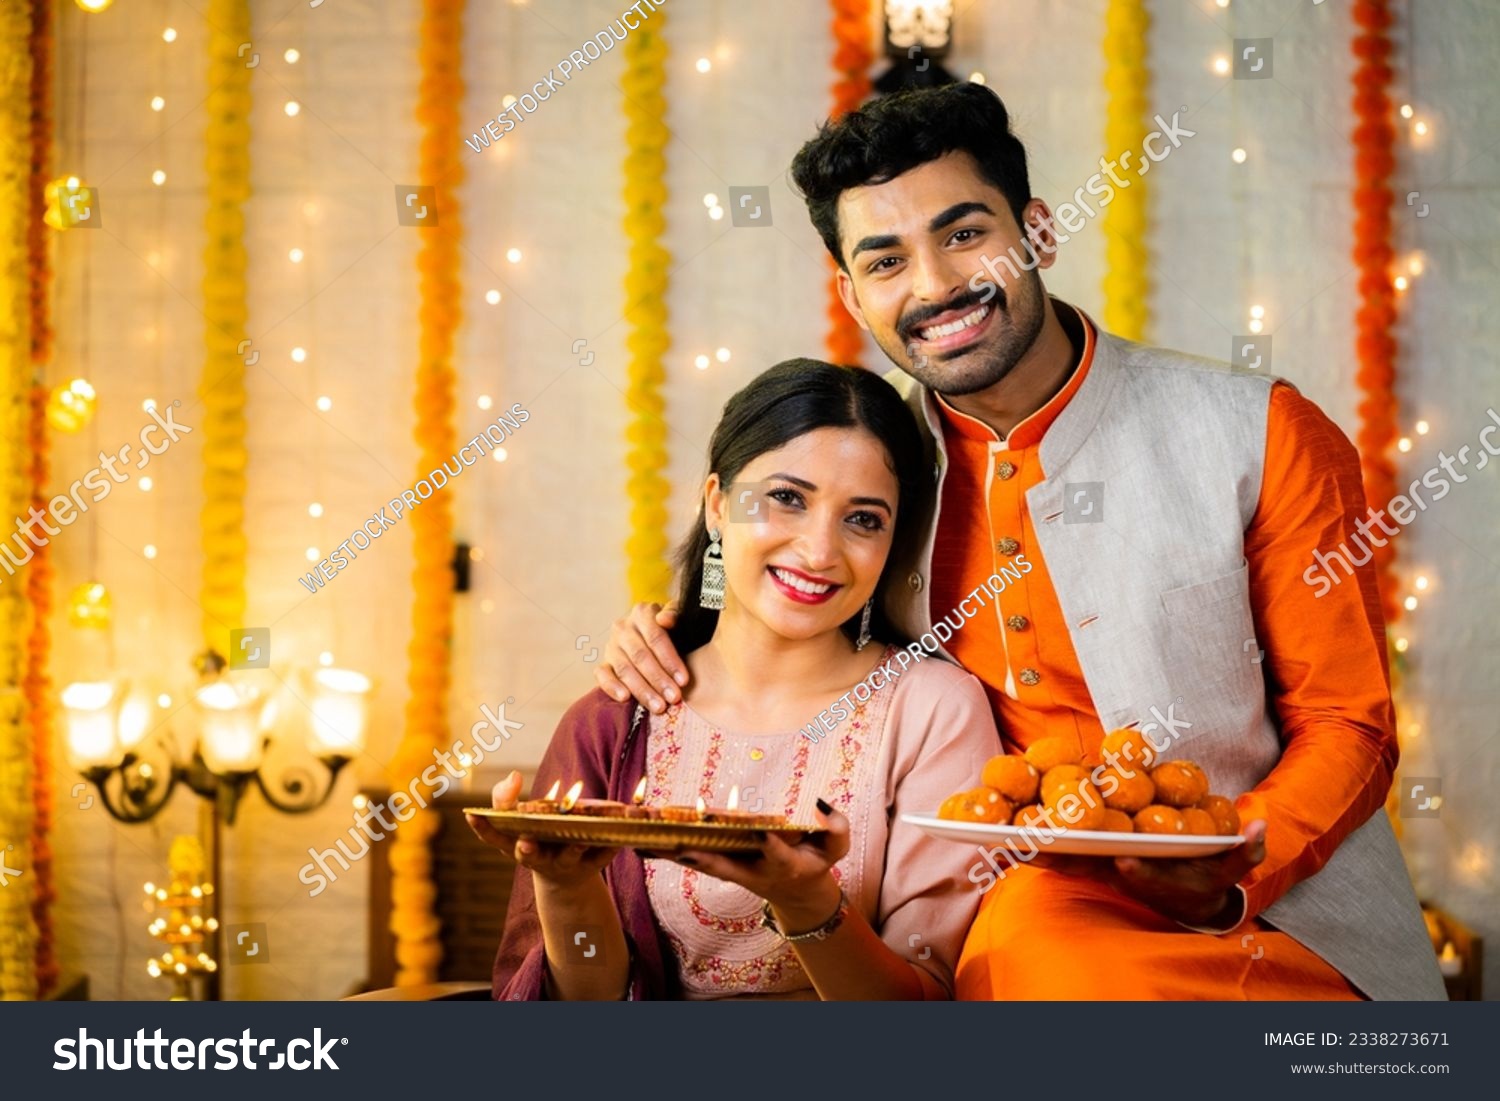 Happy smiling indian couple in traditional ethnic wear by holding sweets at home - concept of diwali festive celebration, greeting and family relationship #2338273671